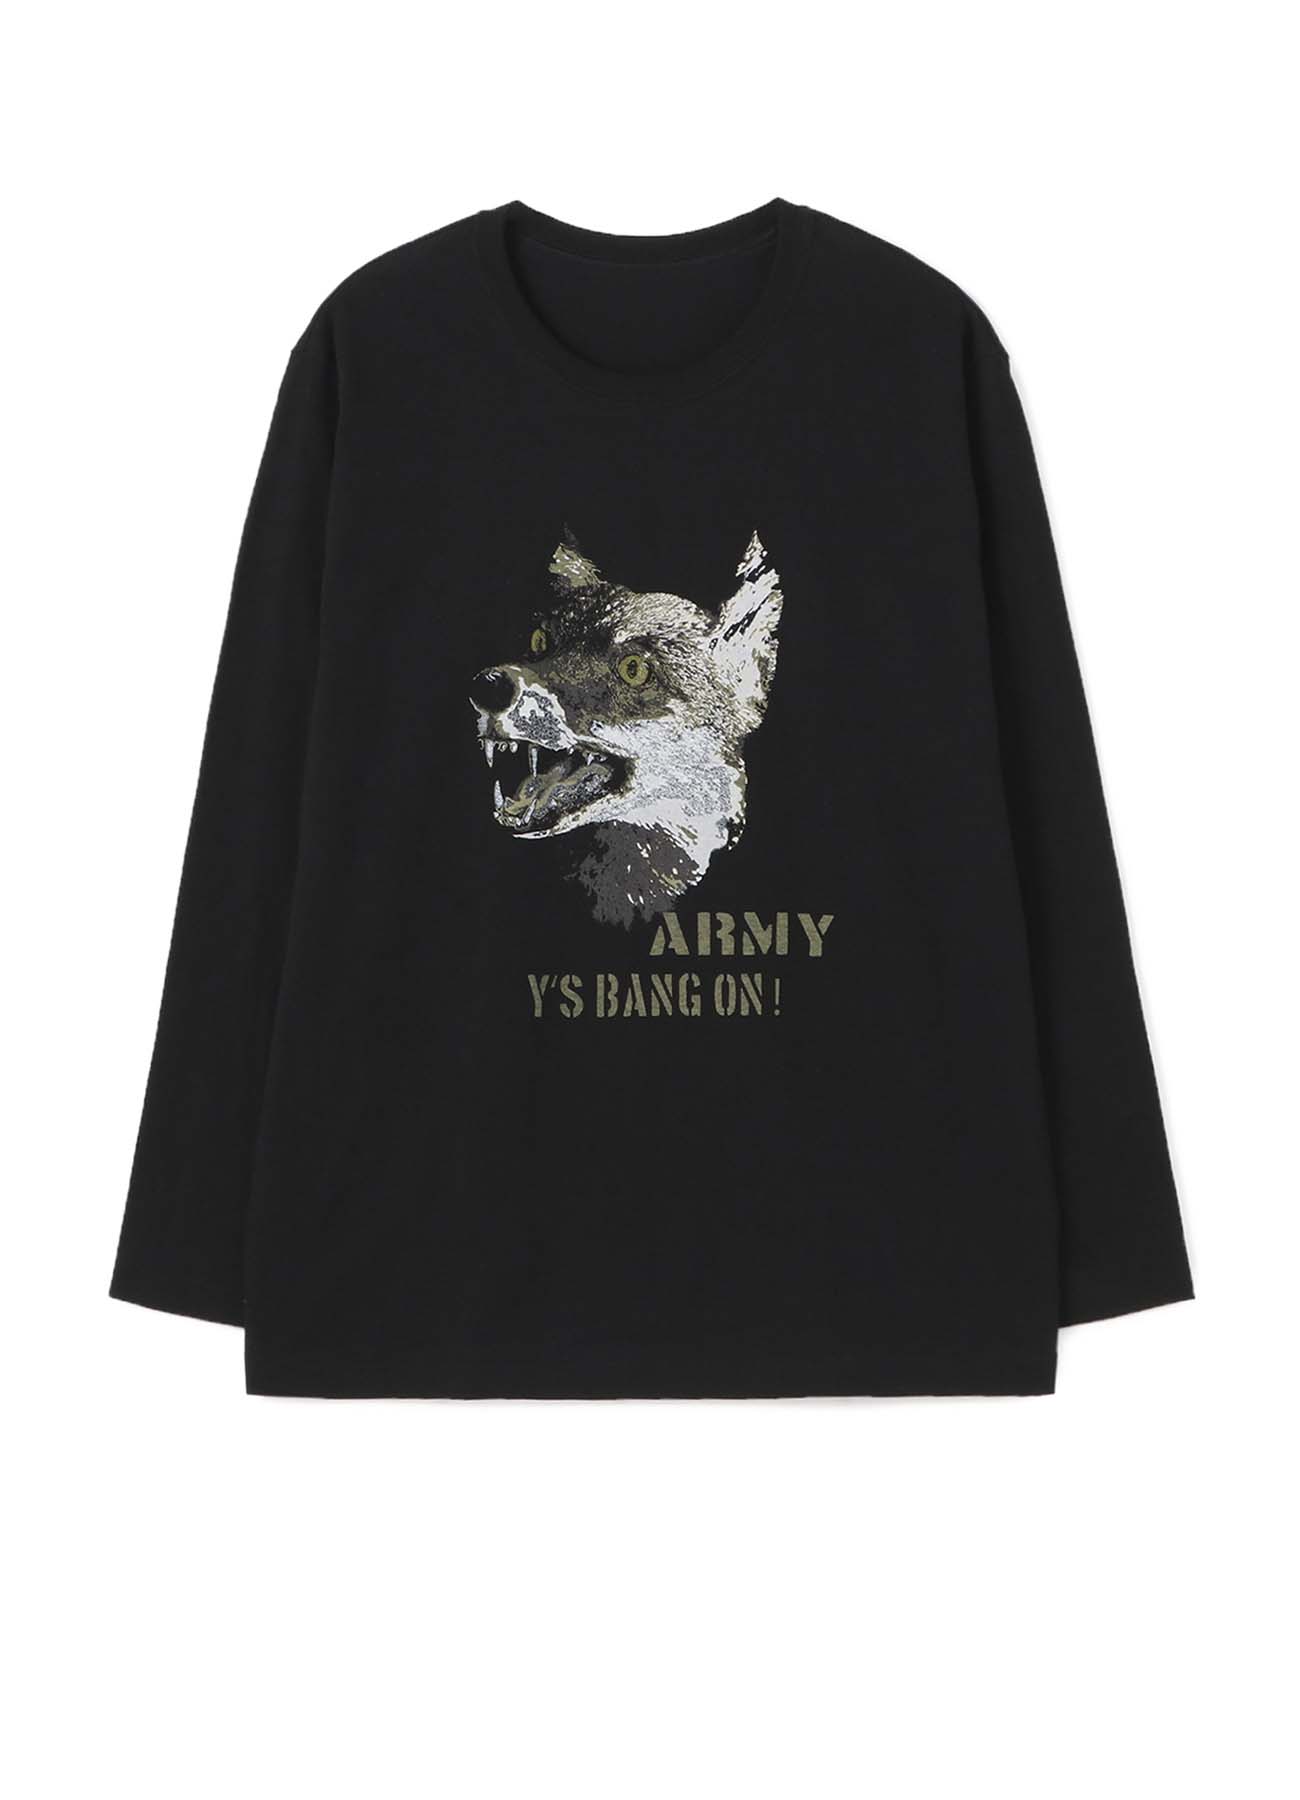 Y's BANG ON!ARMY WOLF T-Shirt